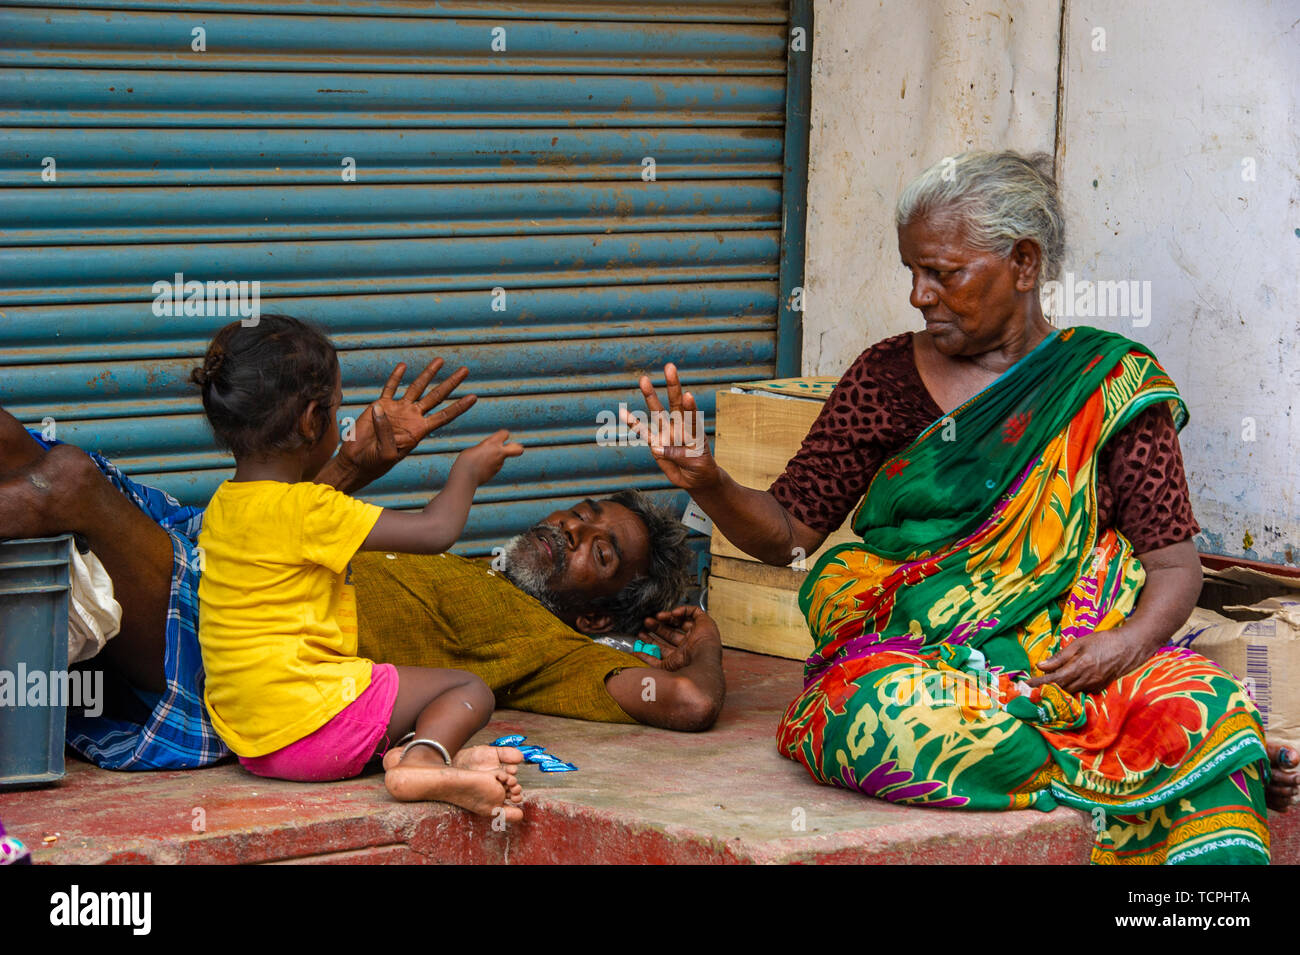 Poverty in Chennai, India, where three generations of a family play a game together Stock Photo